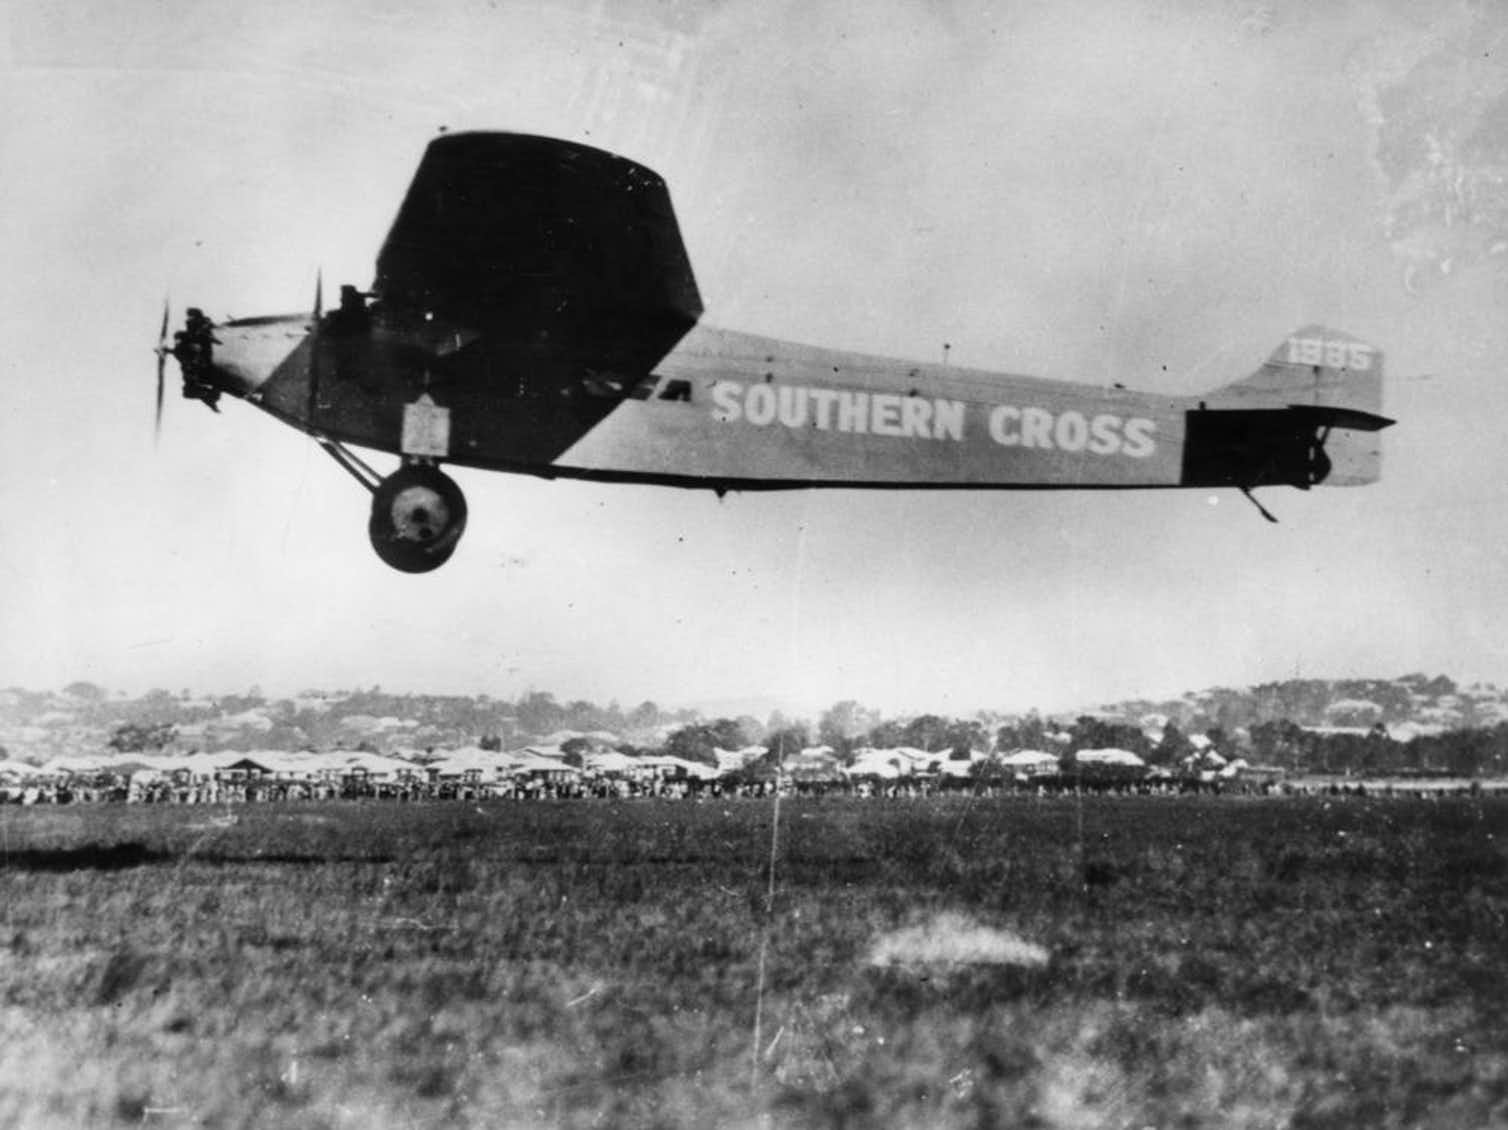 A black and white photo of a small plane bearing the text 'SOUTHERN CROSS' in white paint